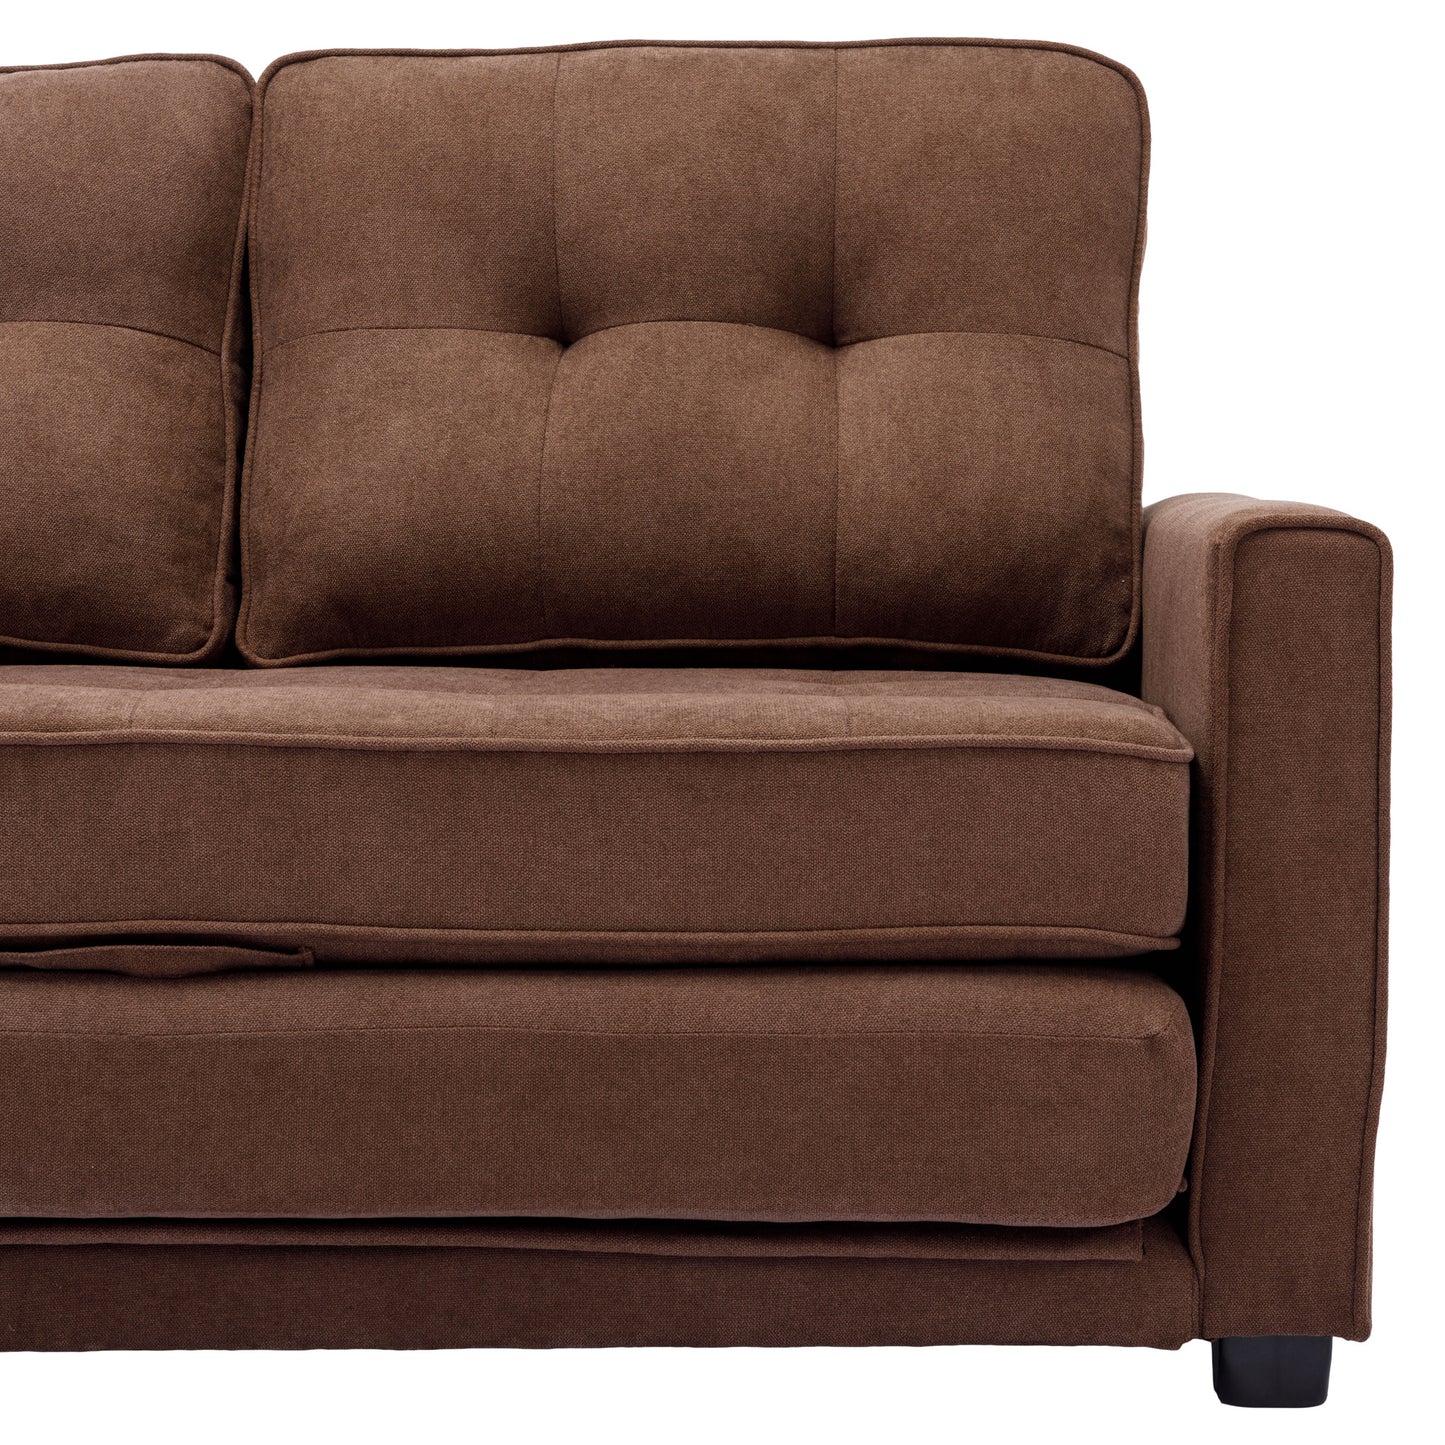 59.4" Loveseat Sofa with Pull-Out Bed Modern Upholstered Couch with Side Pocket for Living Room Office, Brown